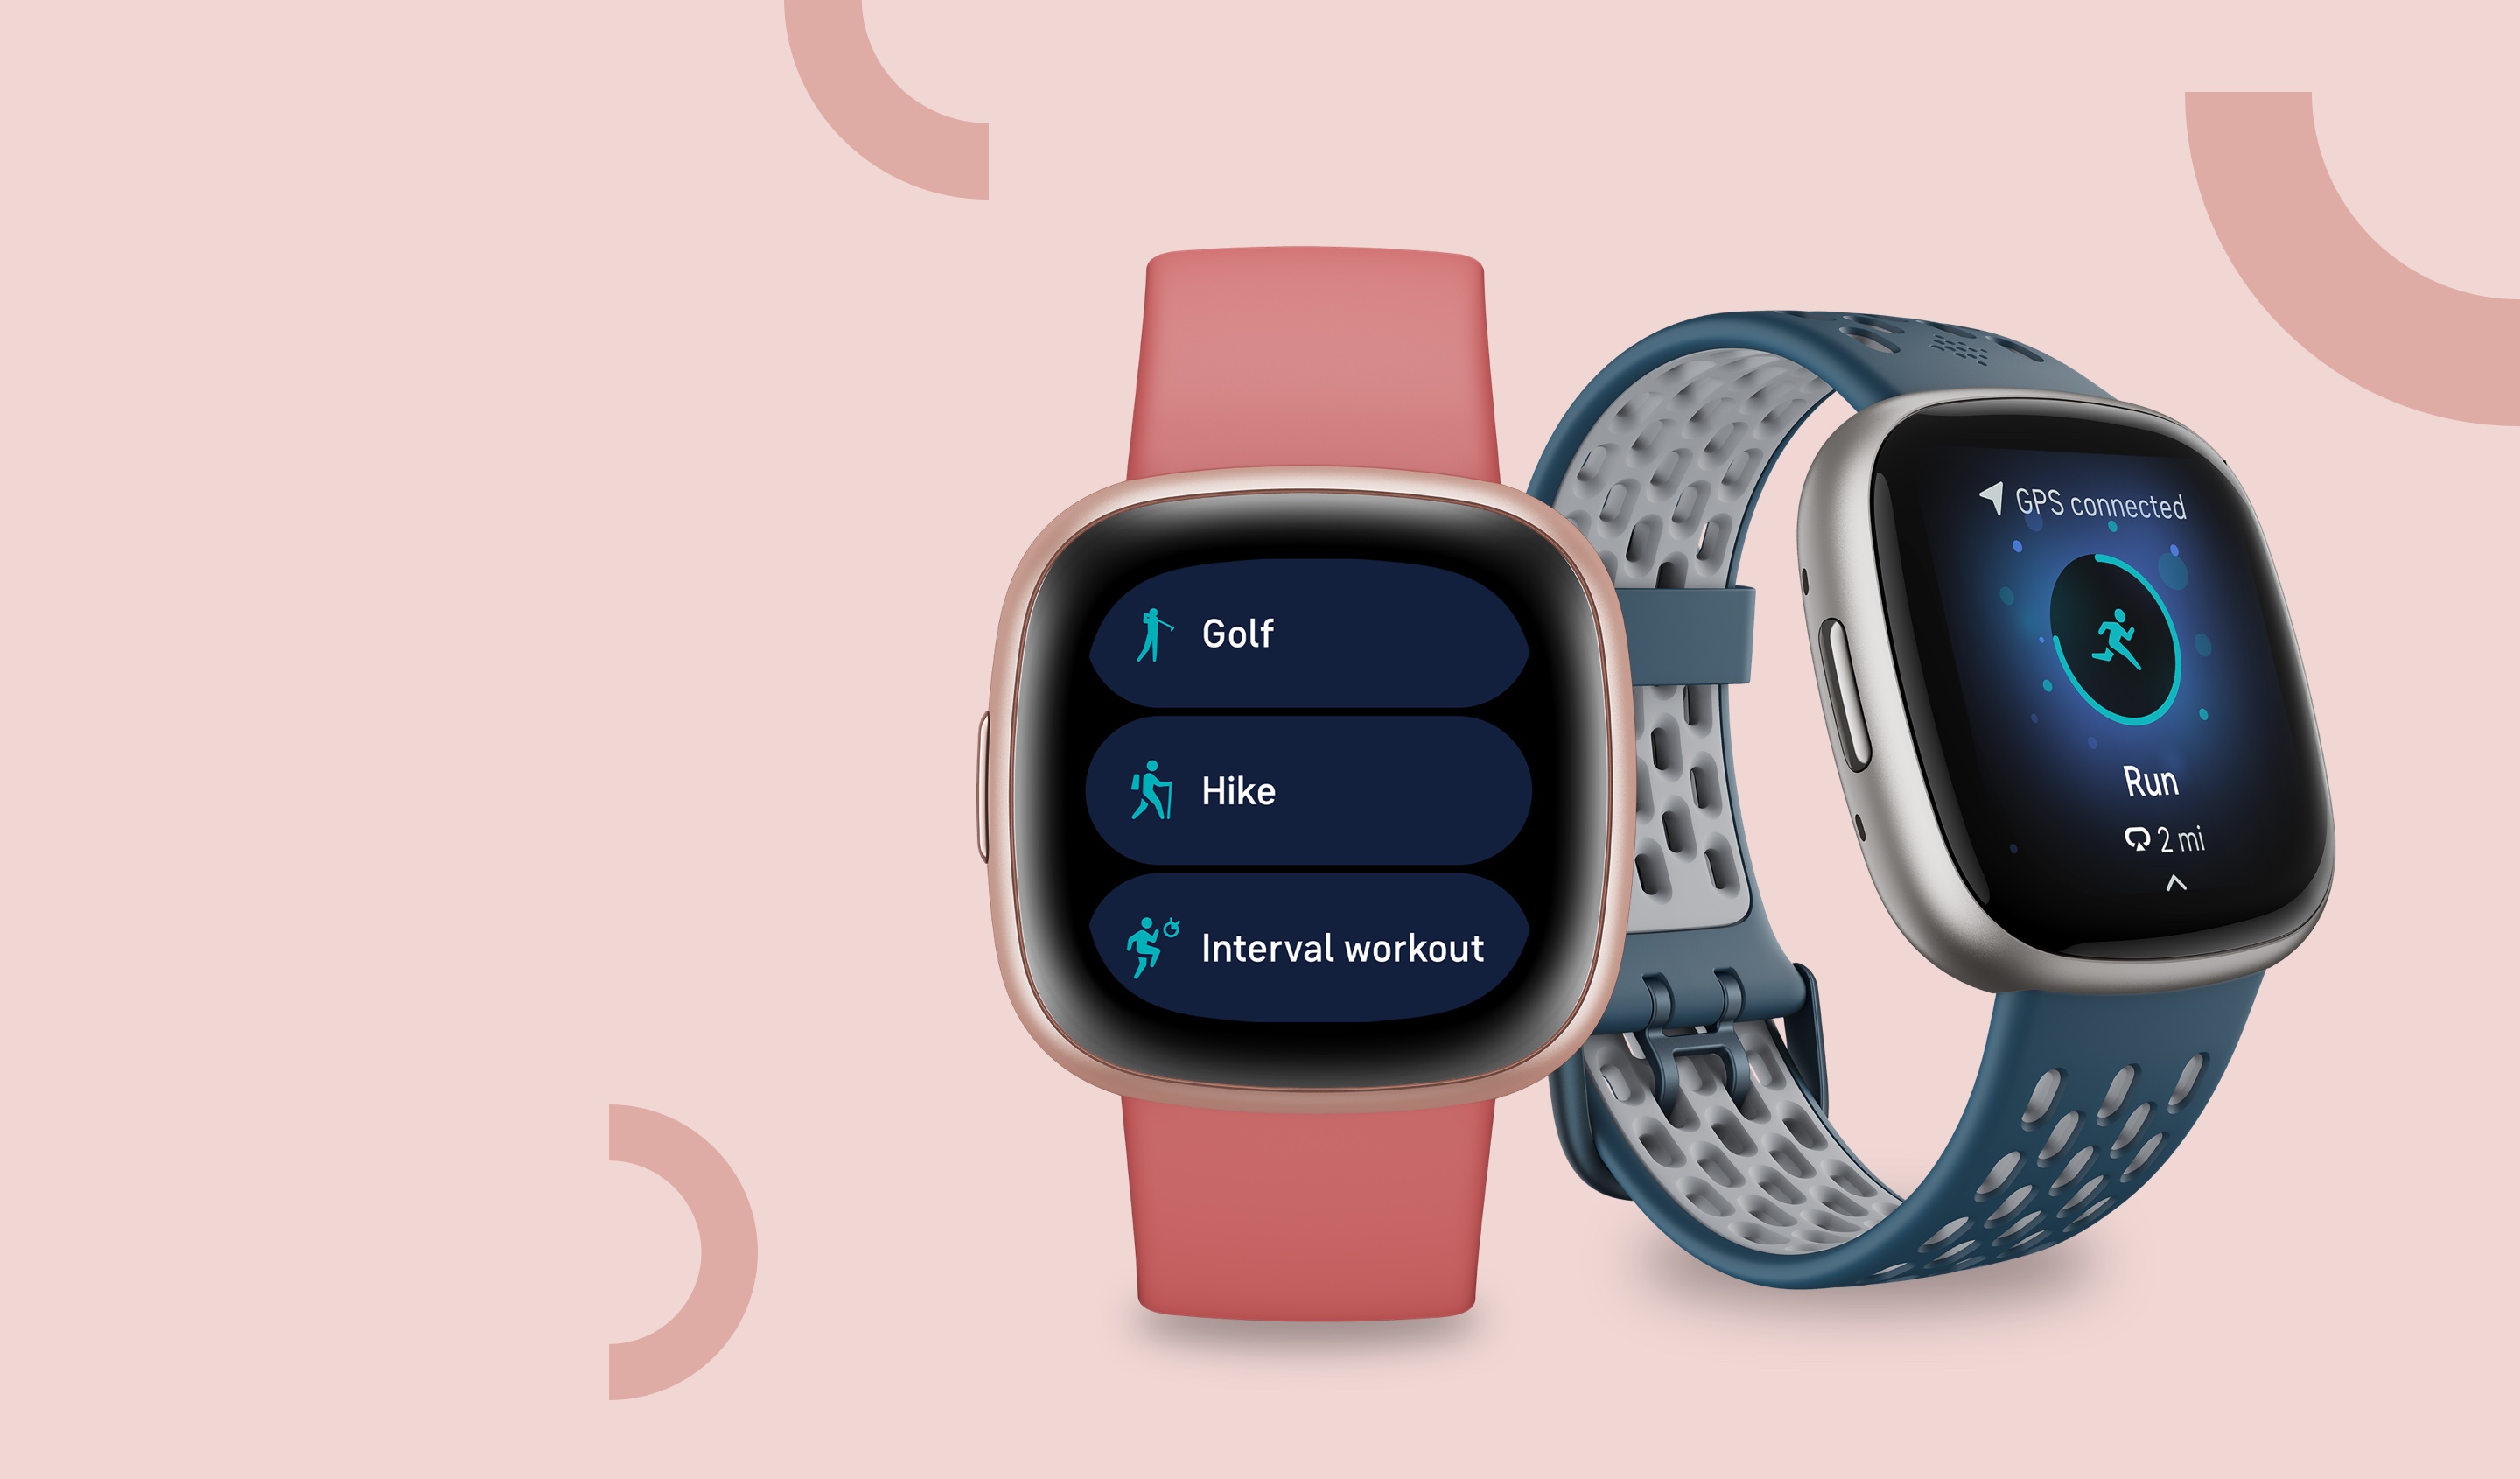 FITBIT Versa Smartwatch Price in India - Buy FITBIT Versa Smartwatch online  at